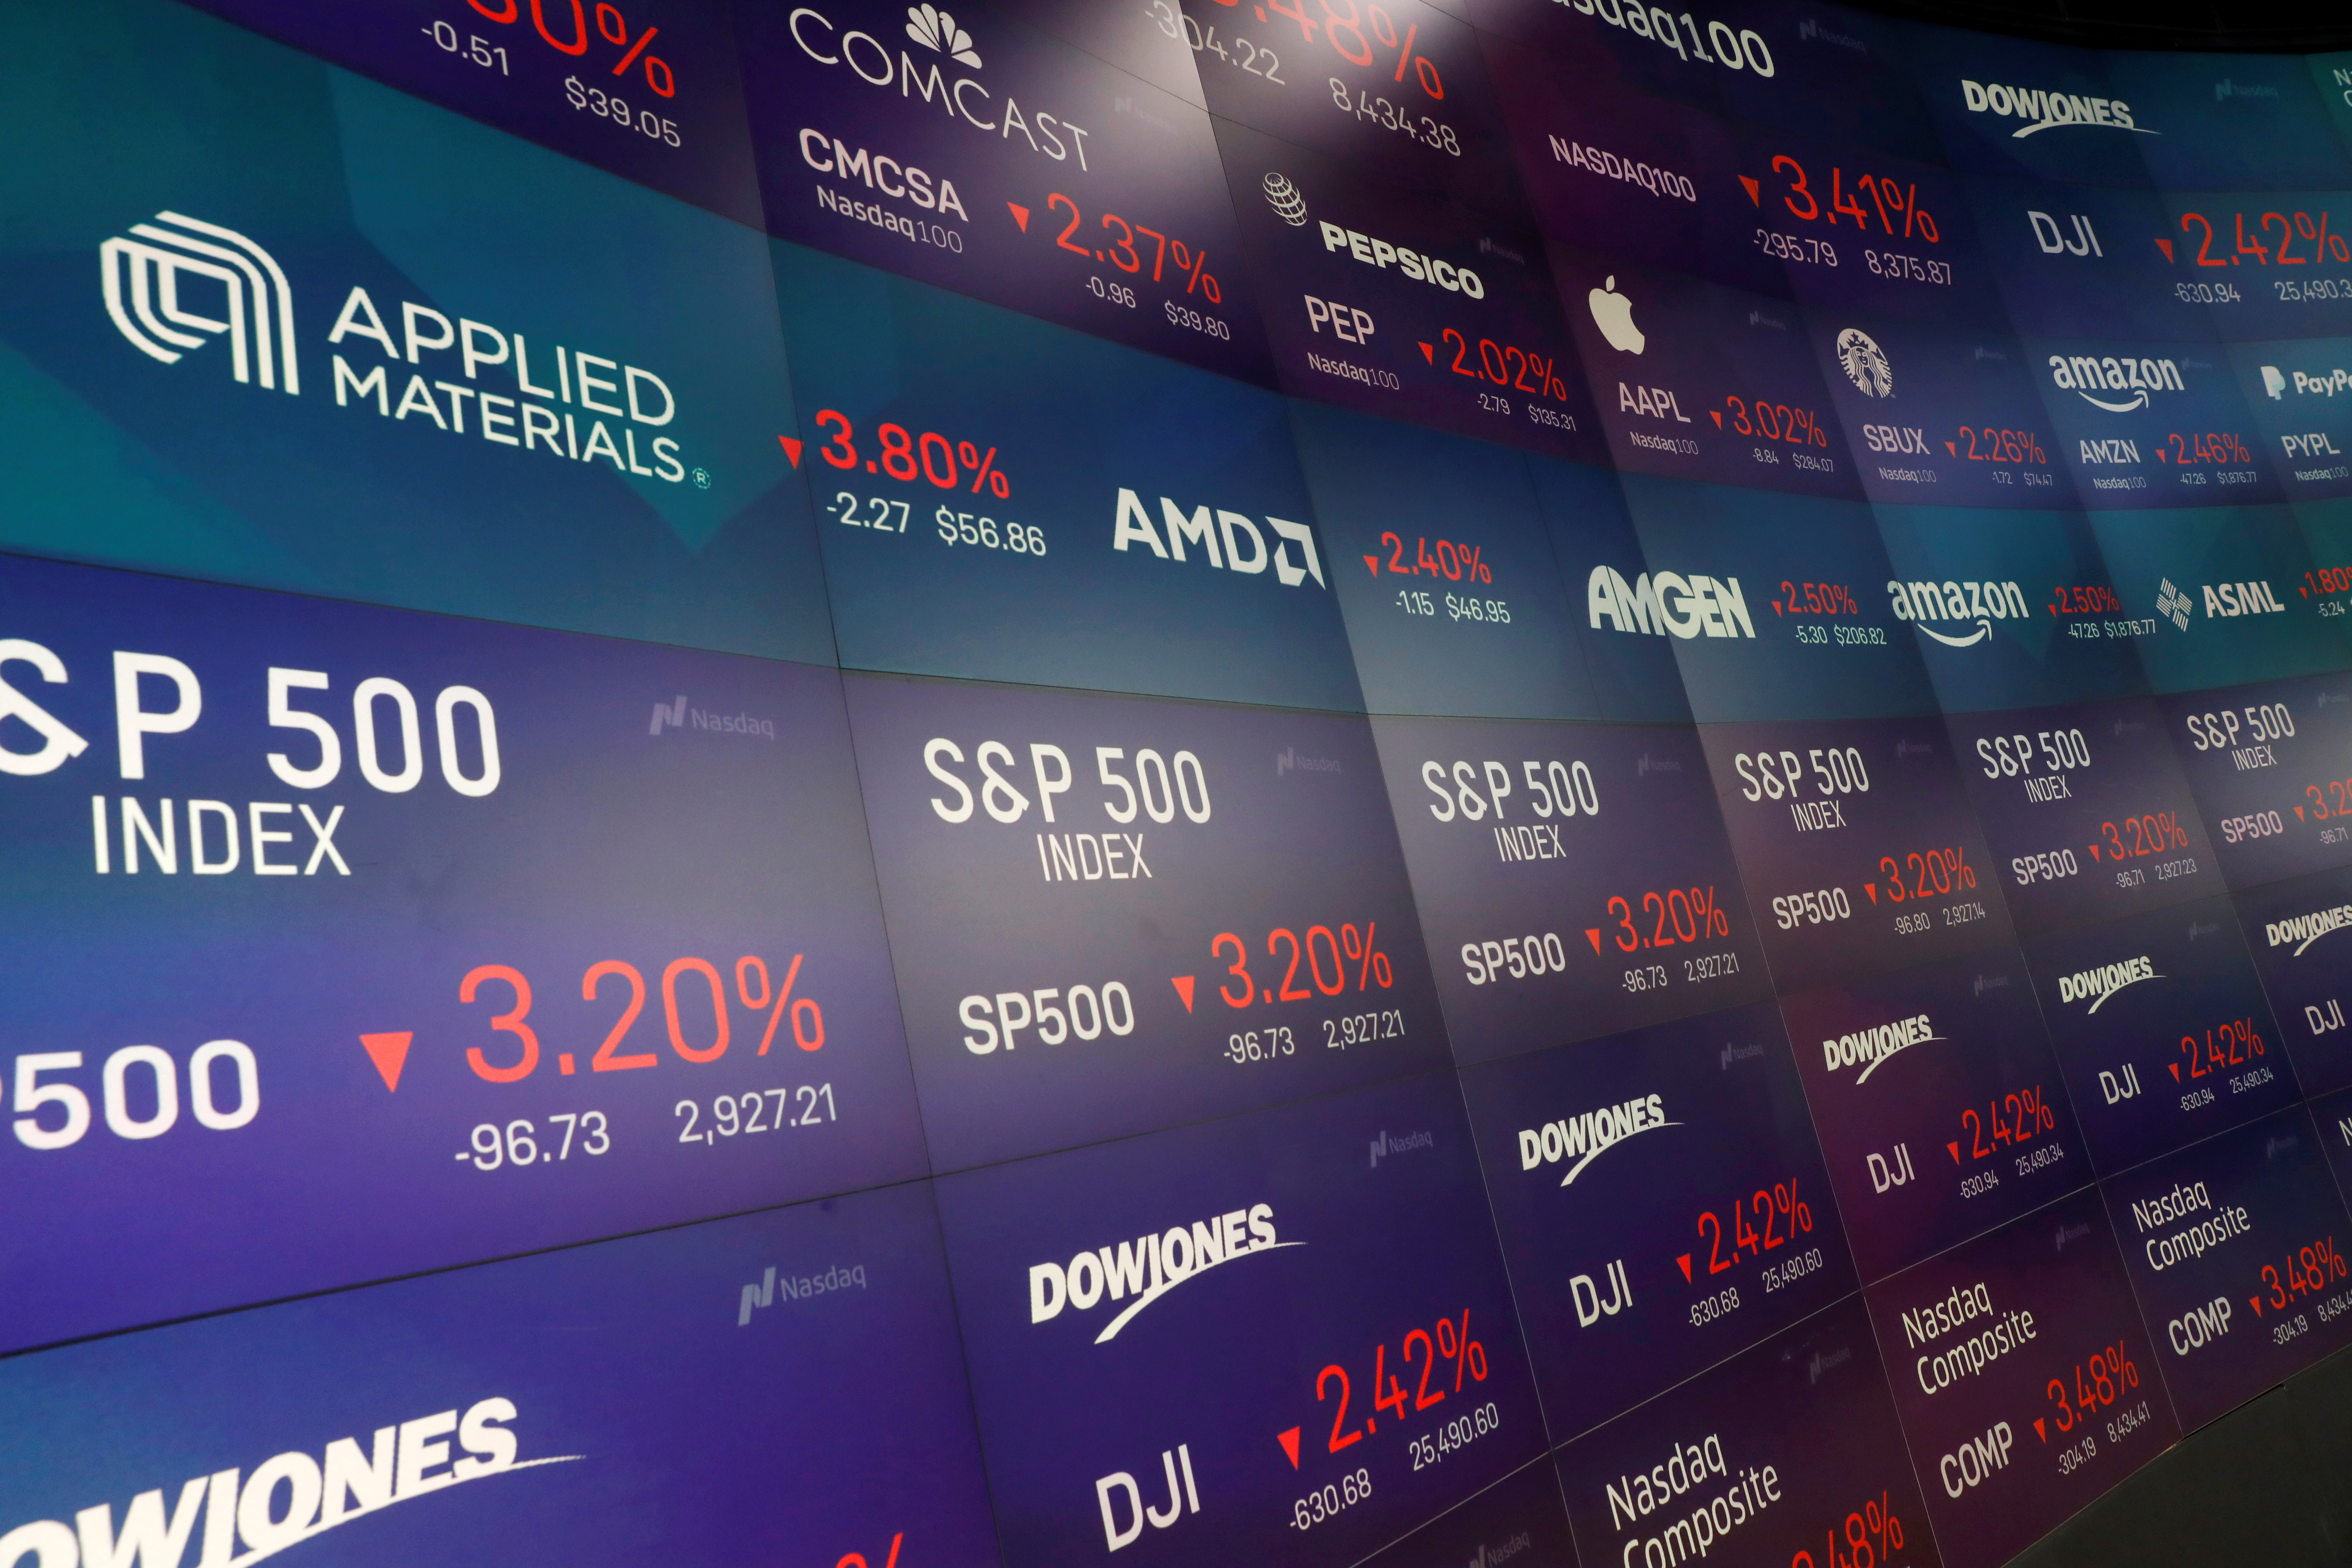 Trading information is displayed on the screens at the Nasdaq Market Site in Times Square, New York City, New York